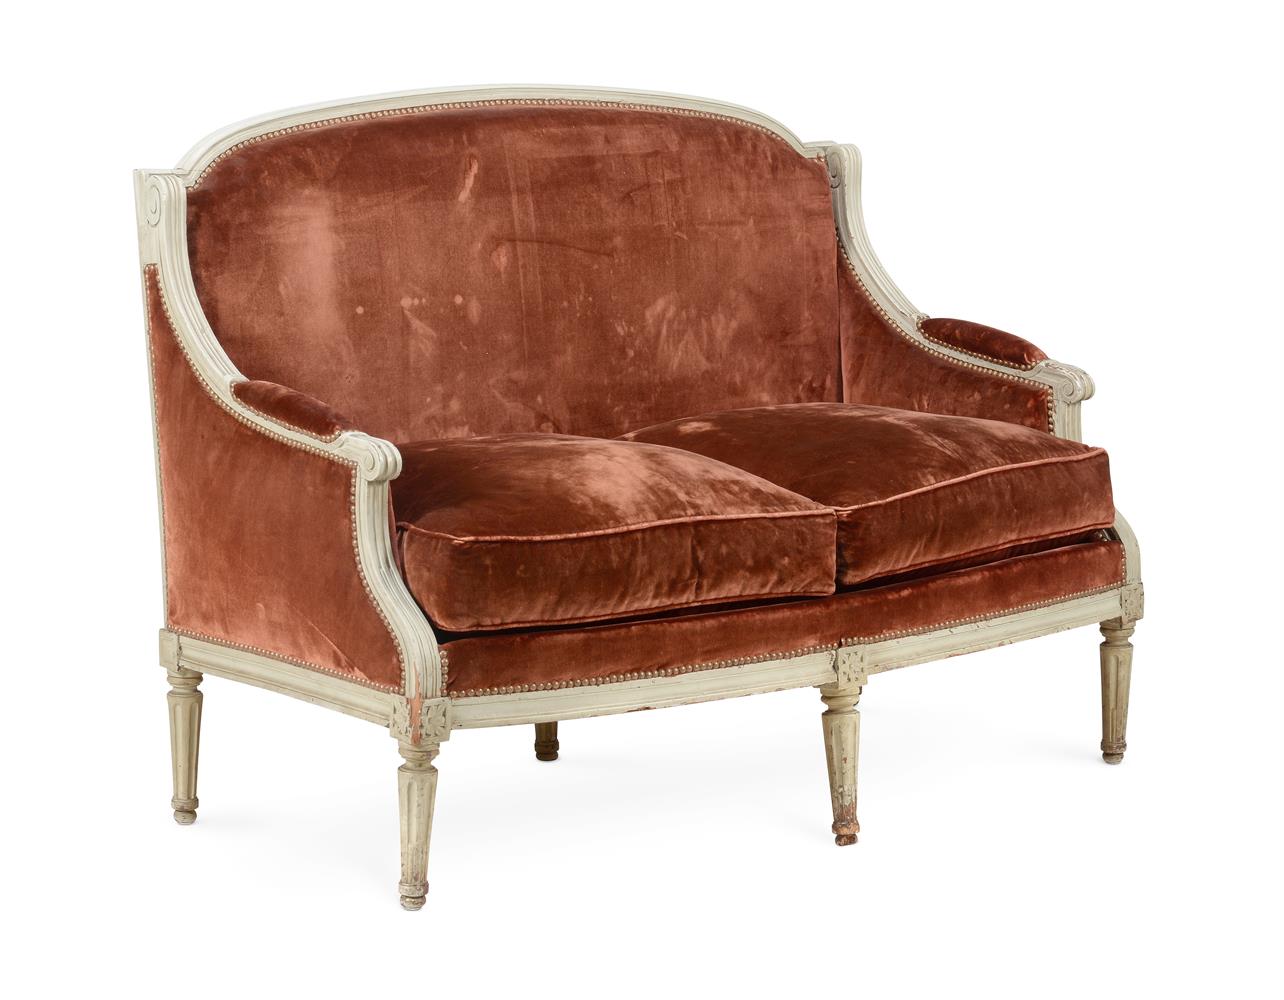 A LOUIS XVI PAINTED BEECH WOOD AND VELVET UPHOLSTERED CANAPE, LATE 18TH CENTURY - Image 2 of 4